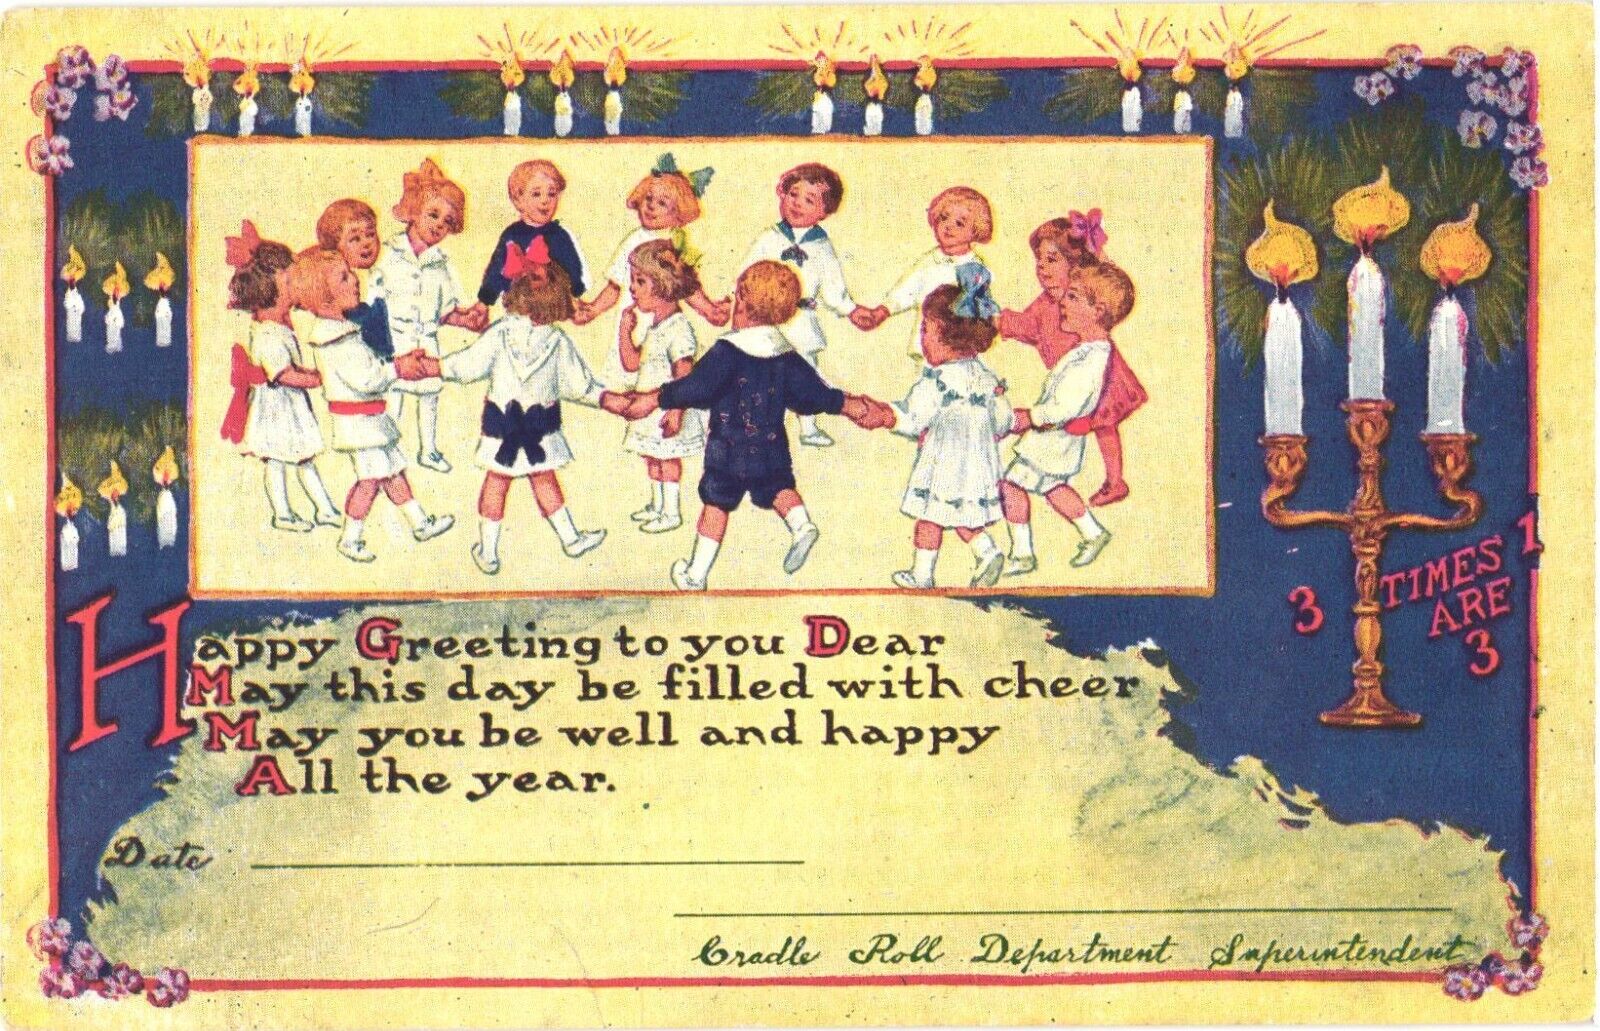 Happy Greeting To You Dear May This Day Be Filled With Cheer, Kids Postcard